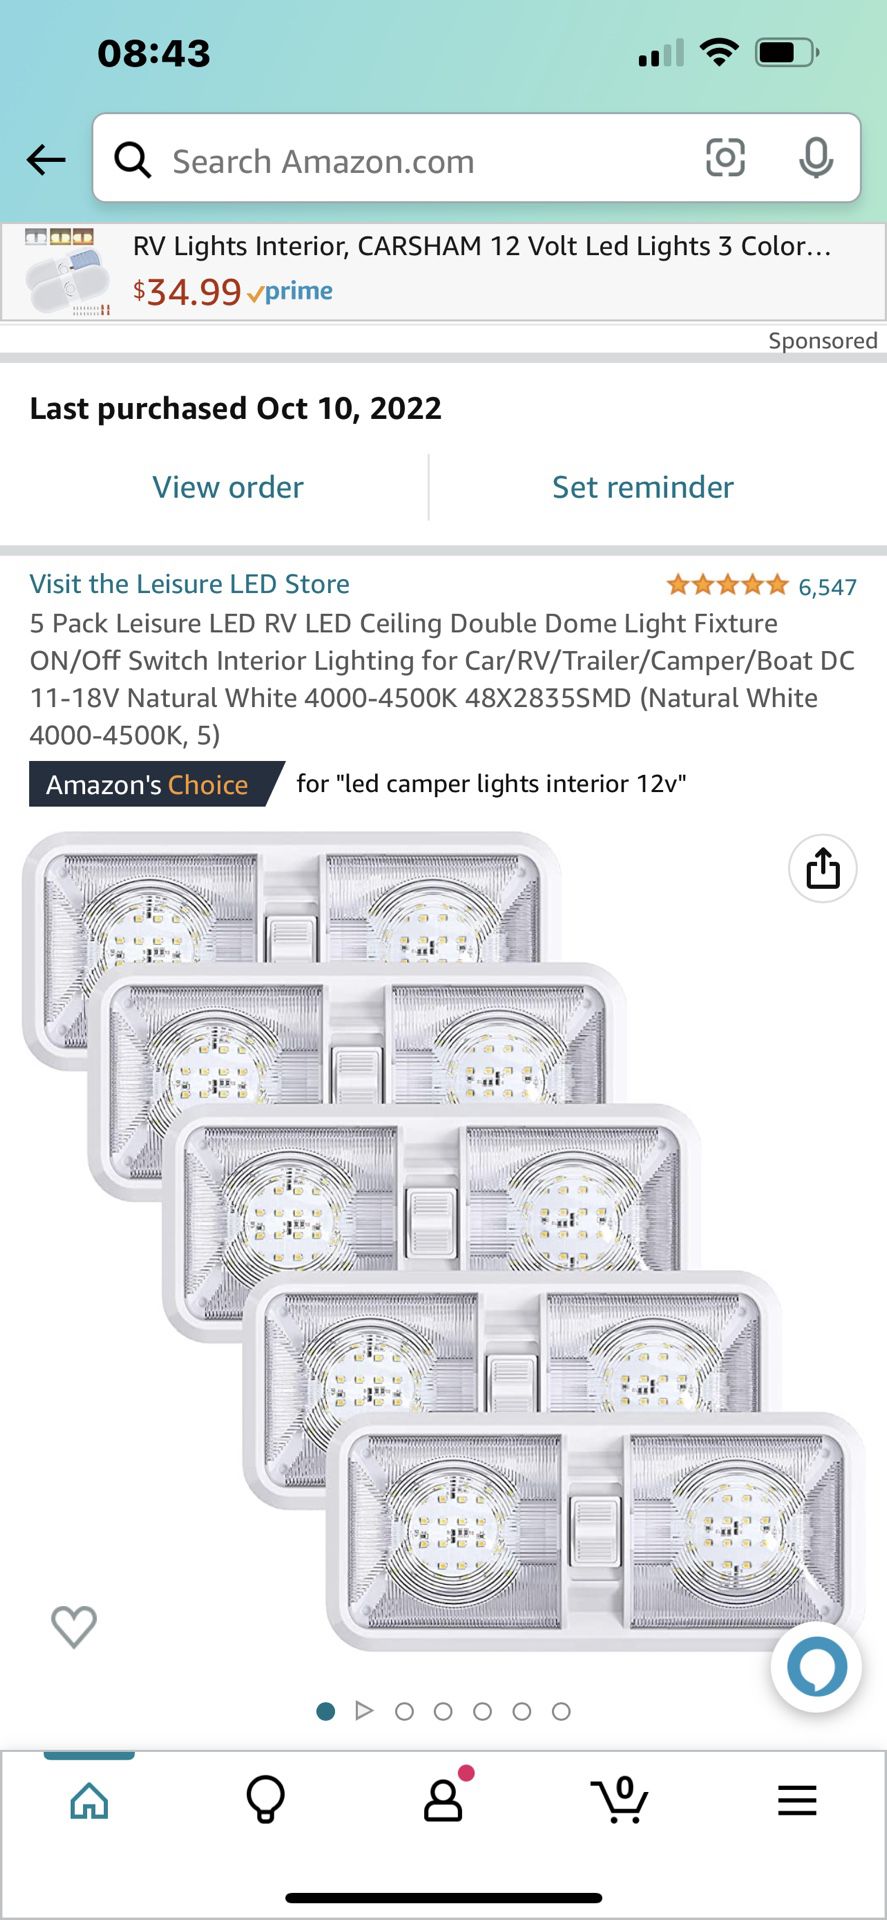  Leisure LED 3 Pack RV LED Ceiling Double Dome Light Fixture  with ON/OFF Switch Interior Lighting for Car/RV/Trailer/Camper/Boat DC 12V  Natural White 4000-4500K 48X2835SMD : Automotive